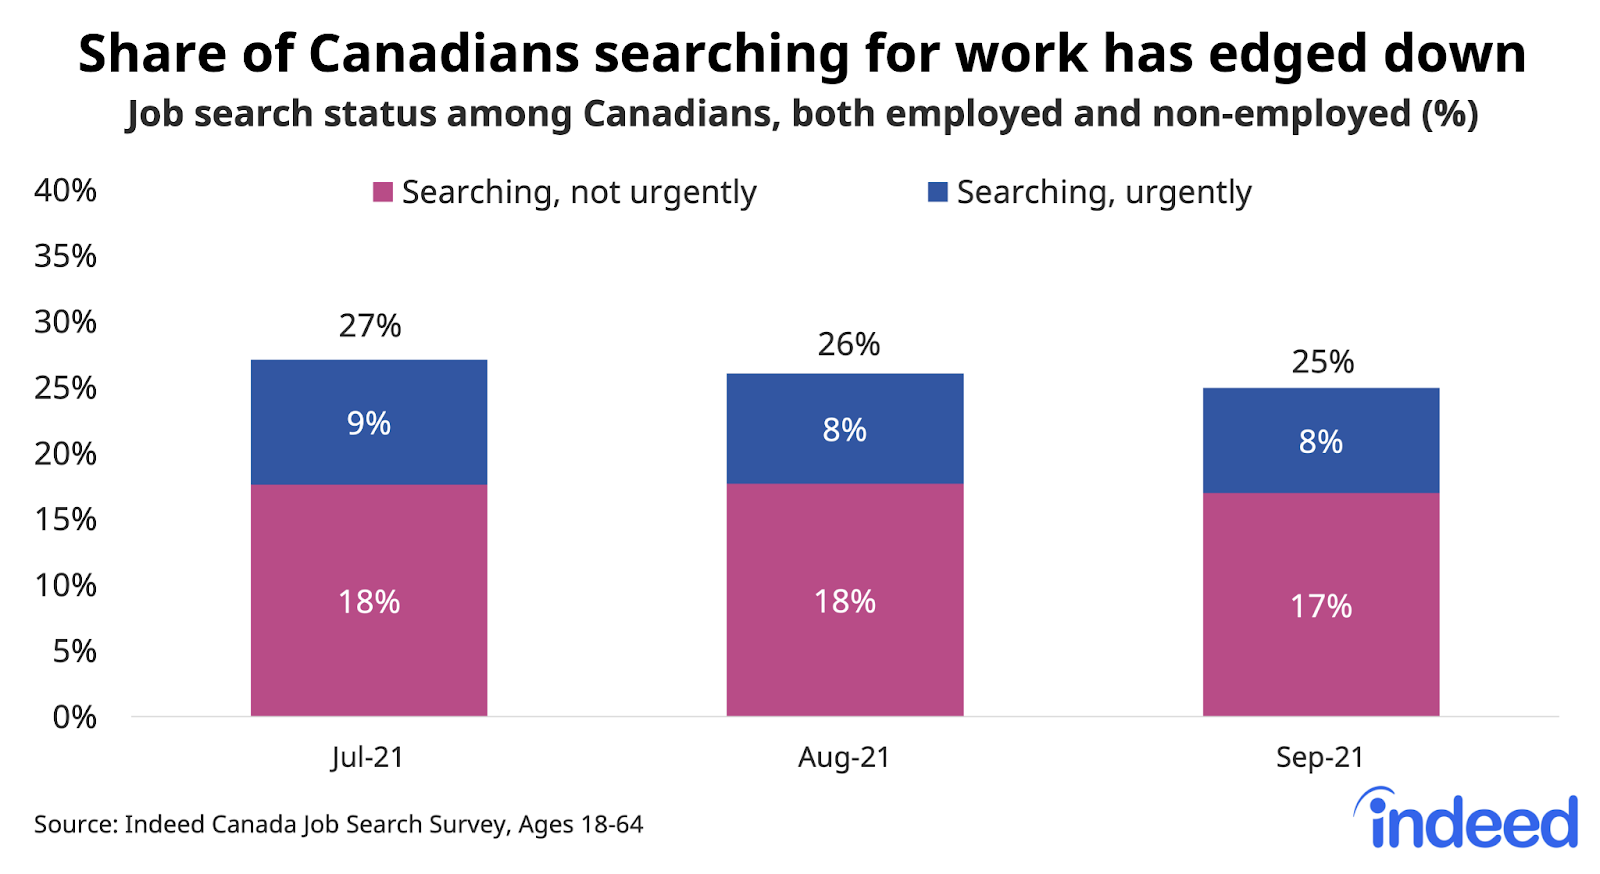 Bar chart titled “Share of Canadians searching for work has edged down.” 